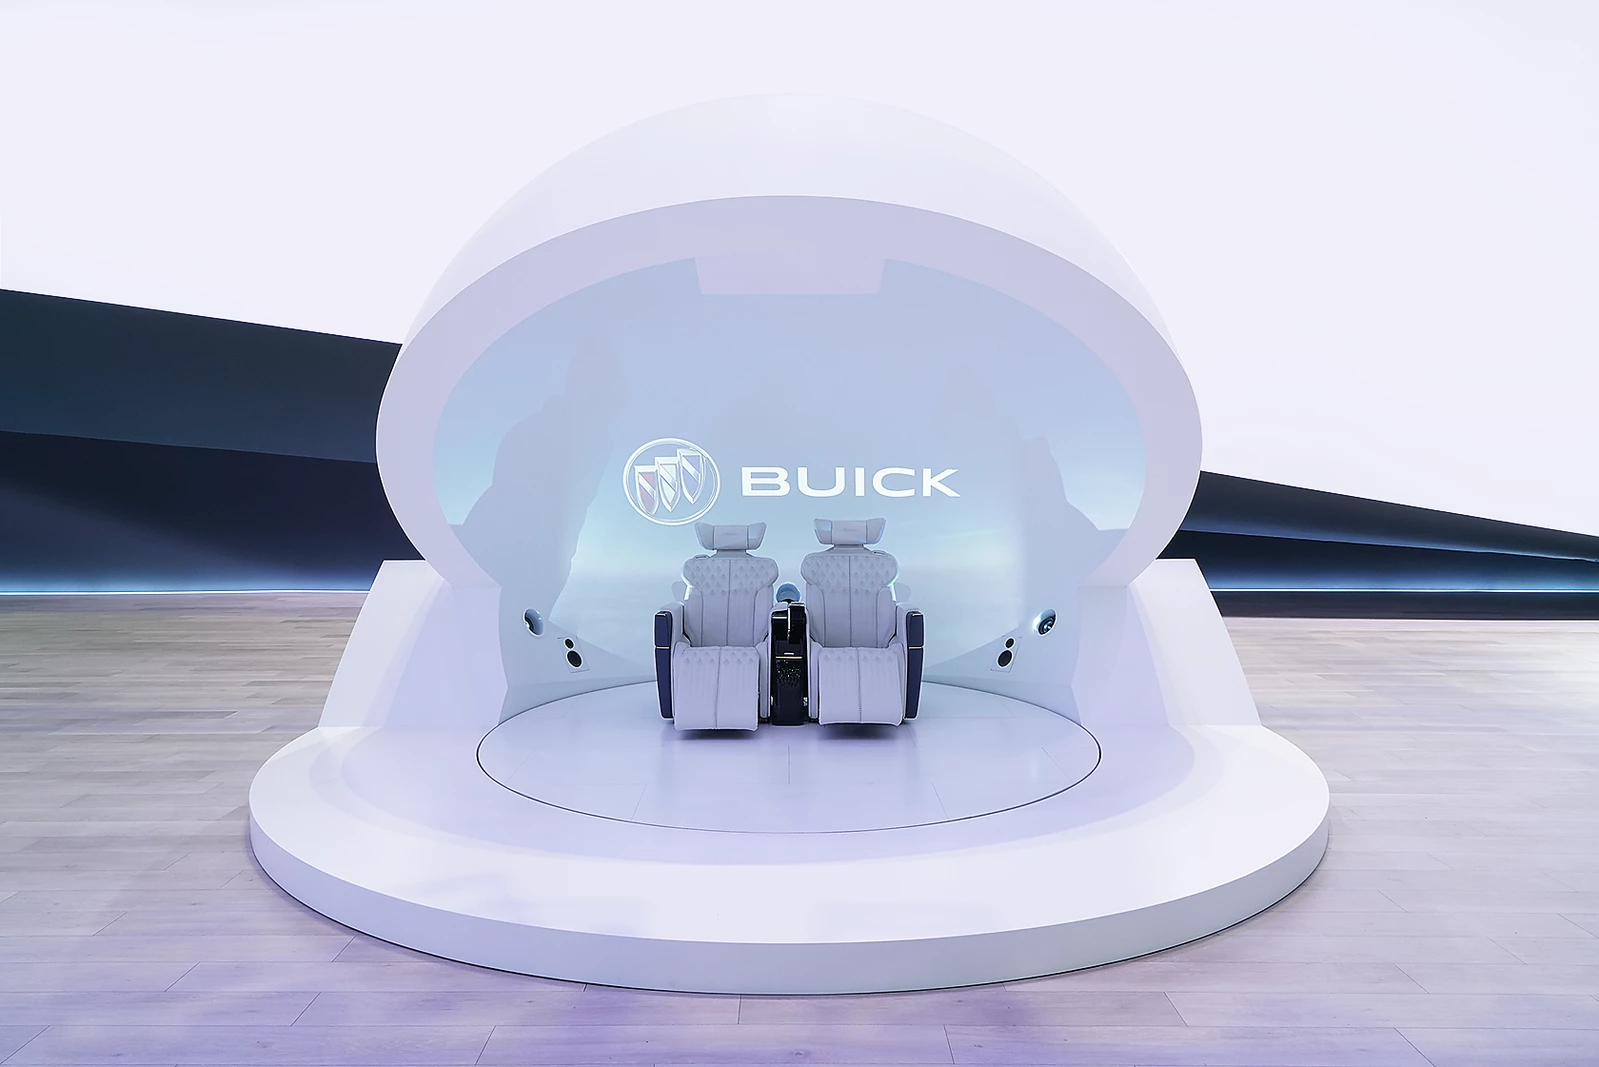 Buick Messestand by SYMA